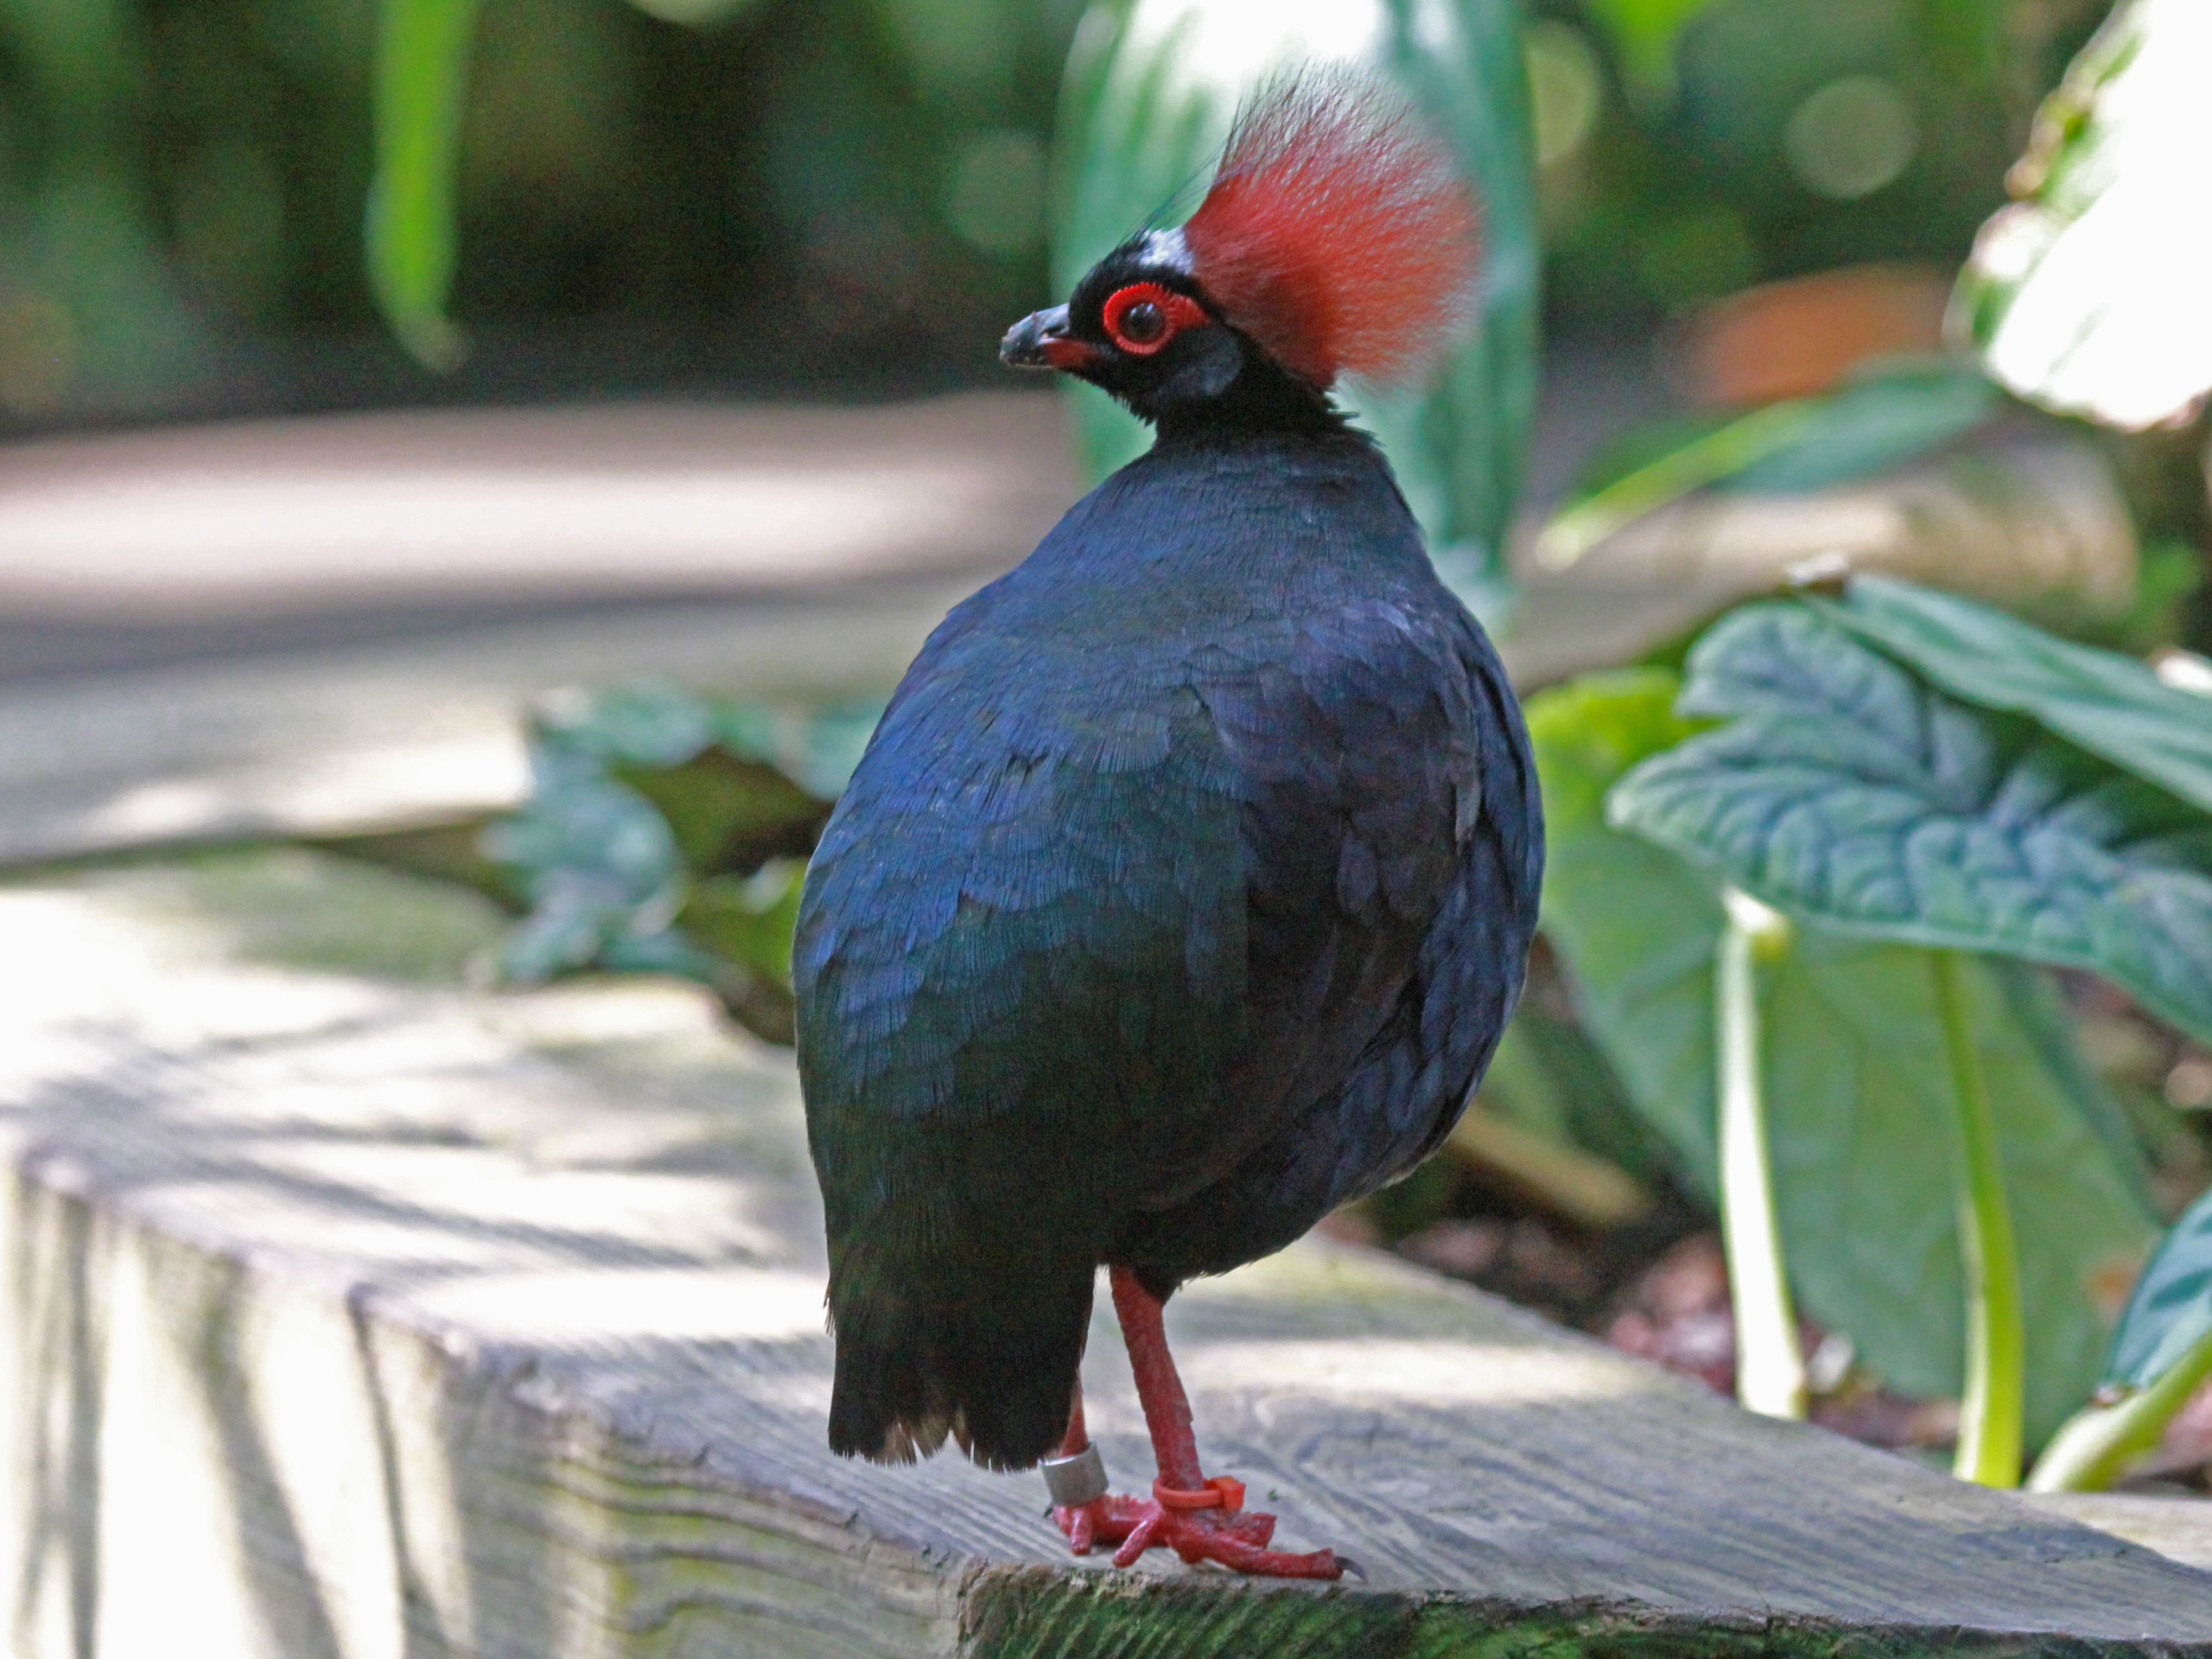 File:Crested Partridge RWD.jpg - Wikimedia Commons